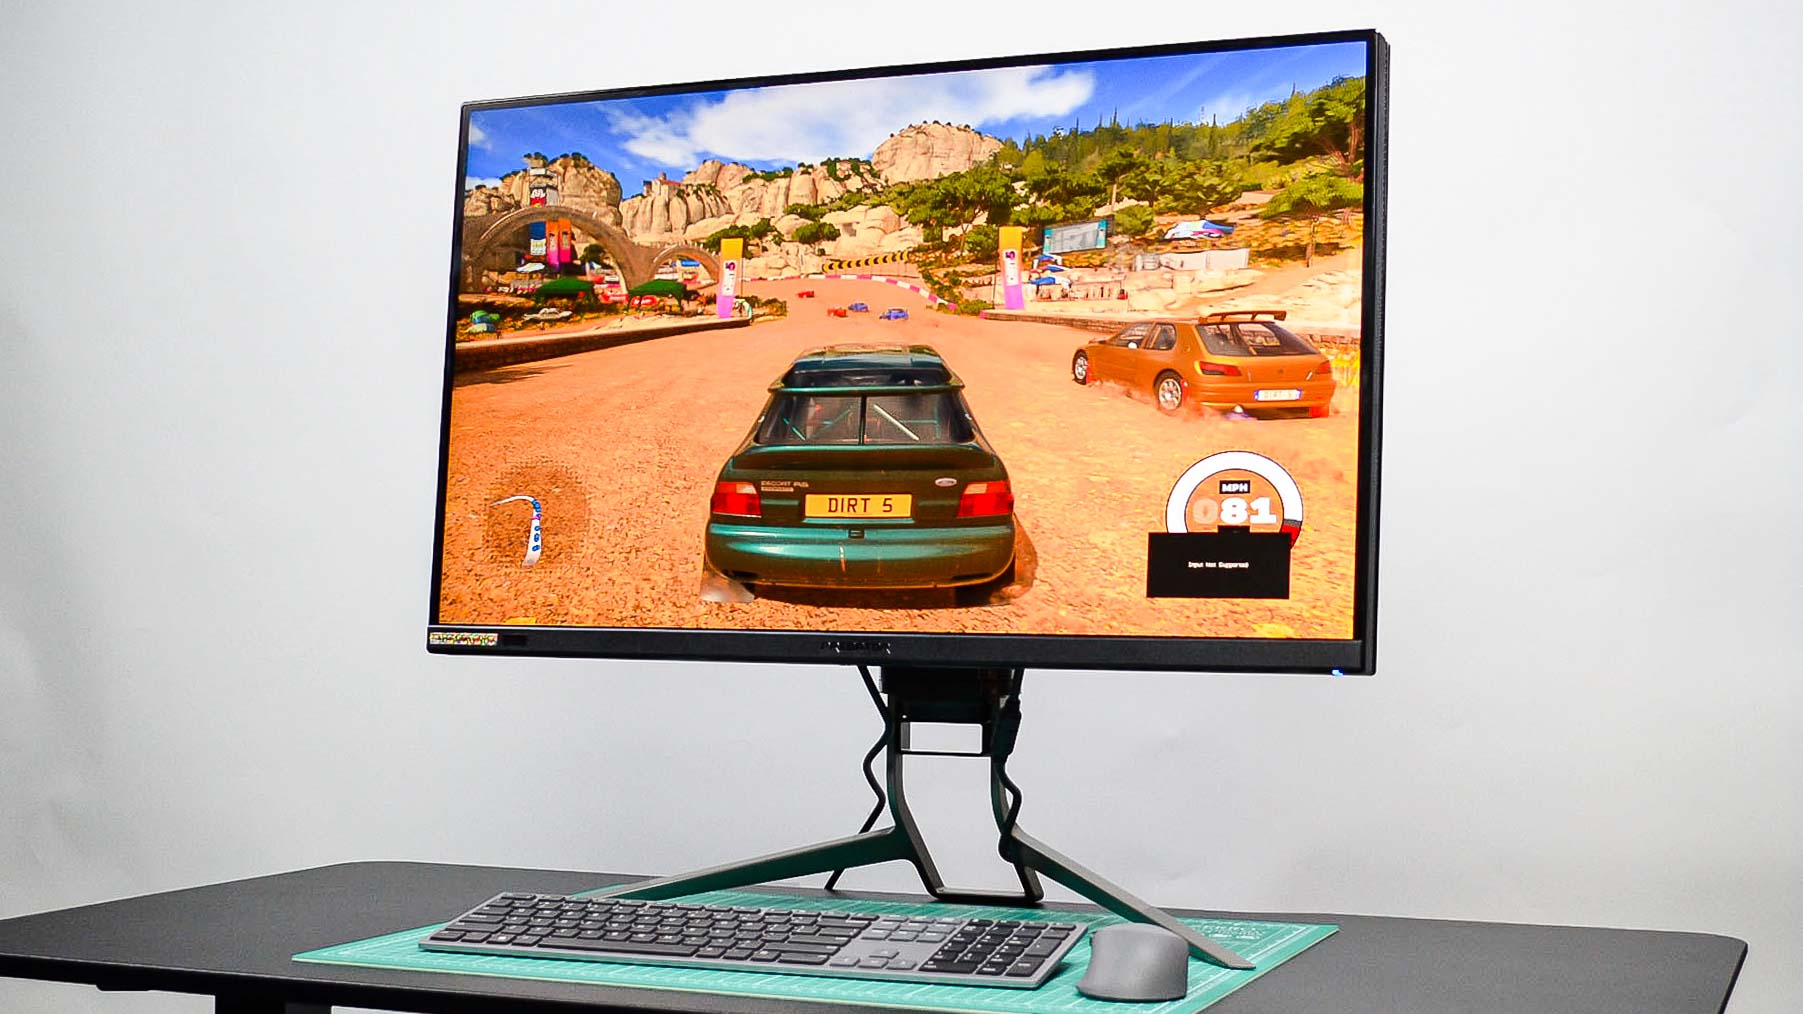 Acer Predator X32 FP gaming monitor review | Tom's Guide